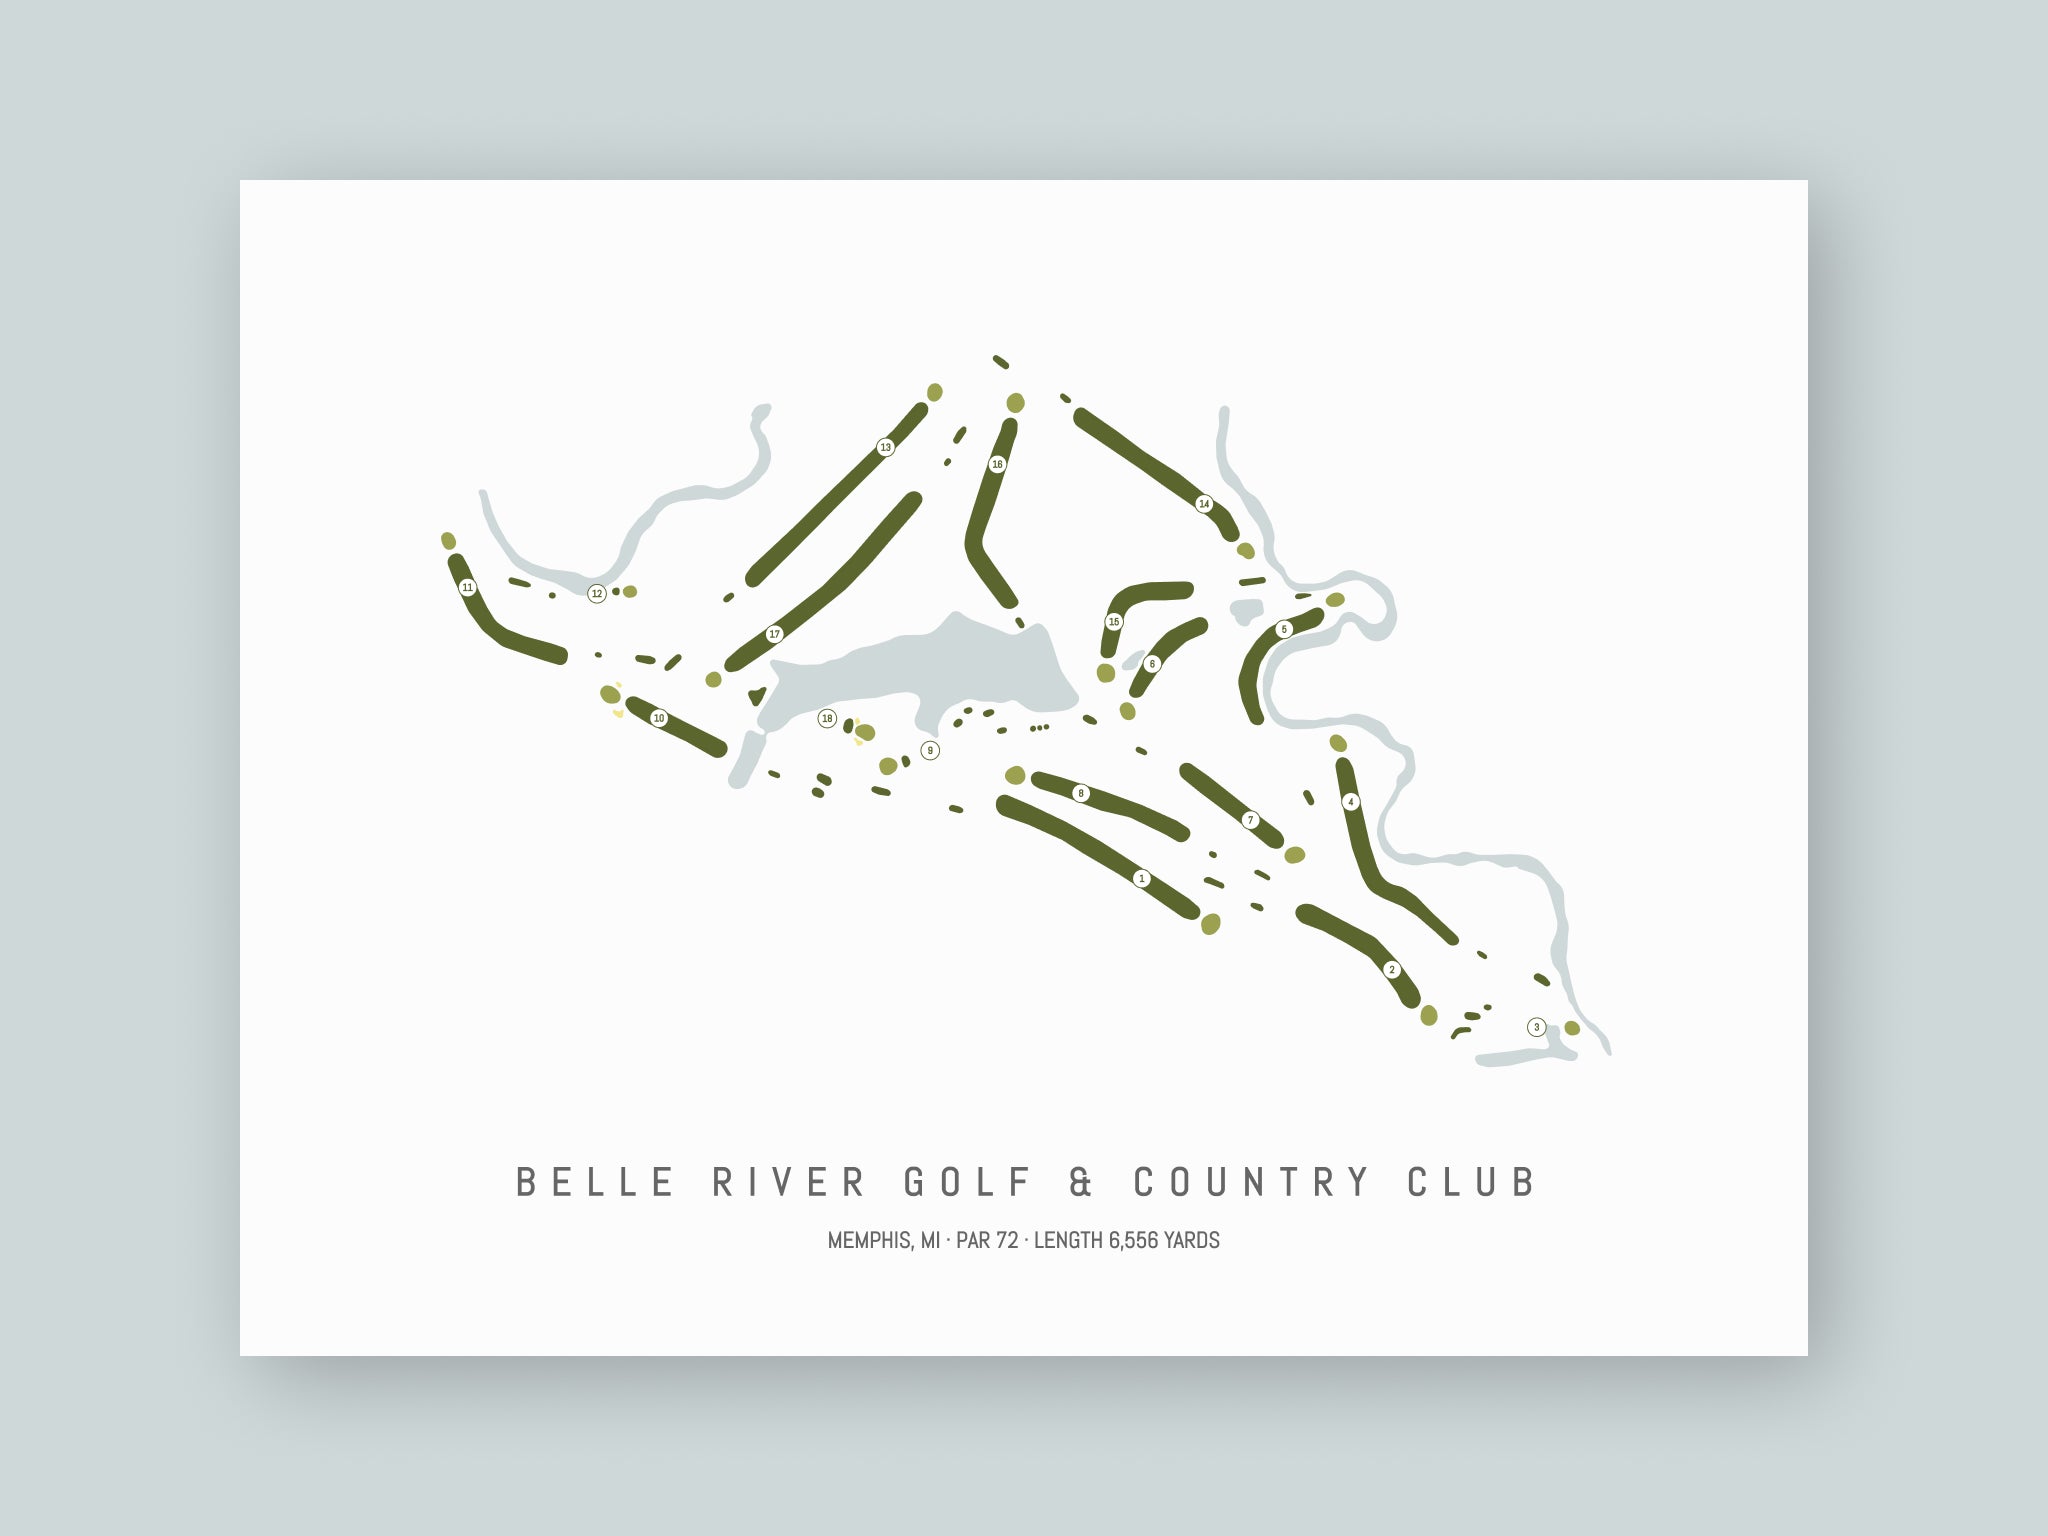 Belle River Golf & Country Club